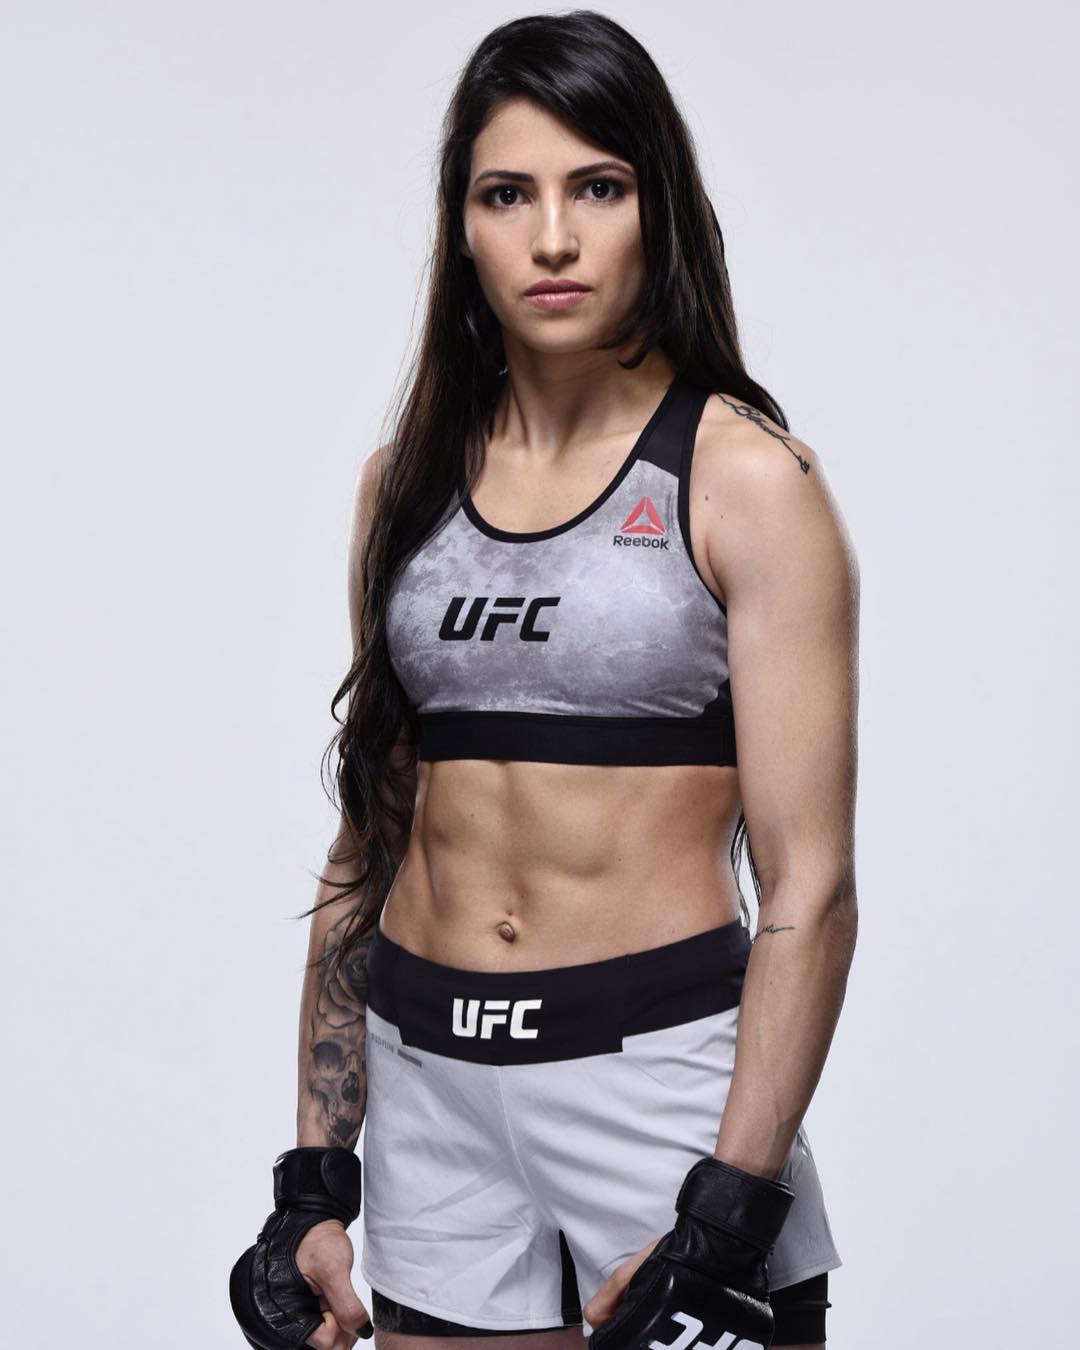 A man tried to steal UFC strawweight Polyana Viana’s phone. Not only did he leave empty-handed, but he also got some painful reminders of his mistake in the process.